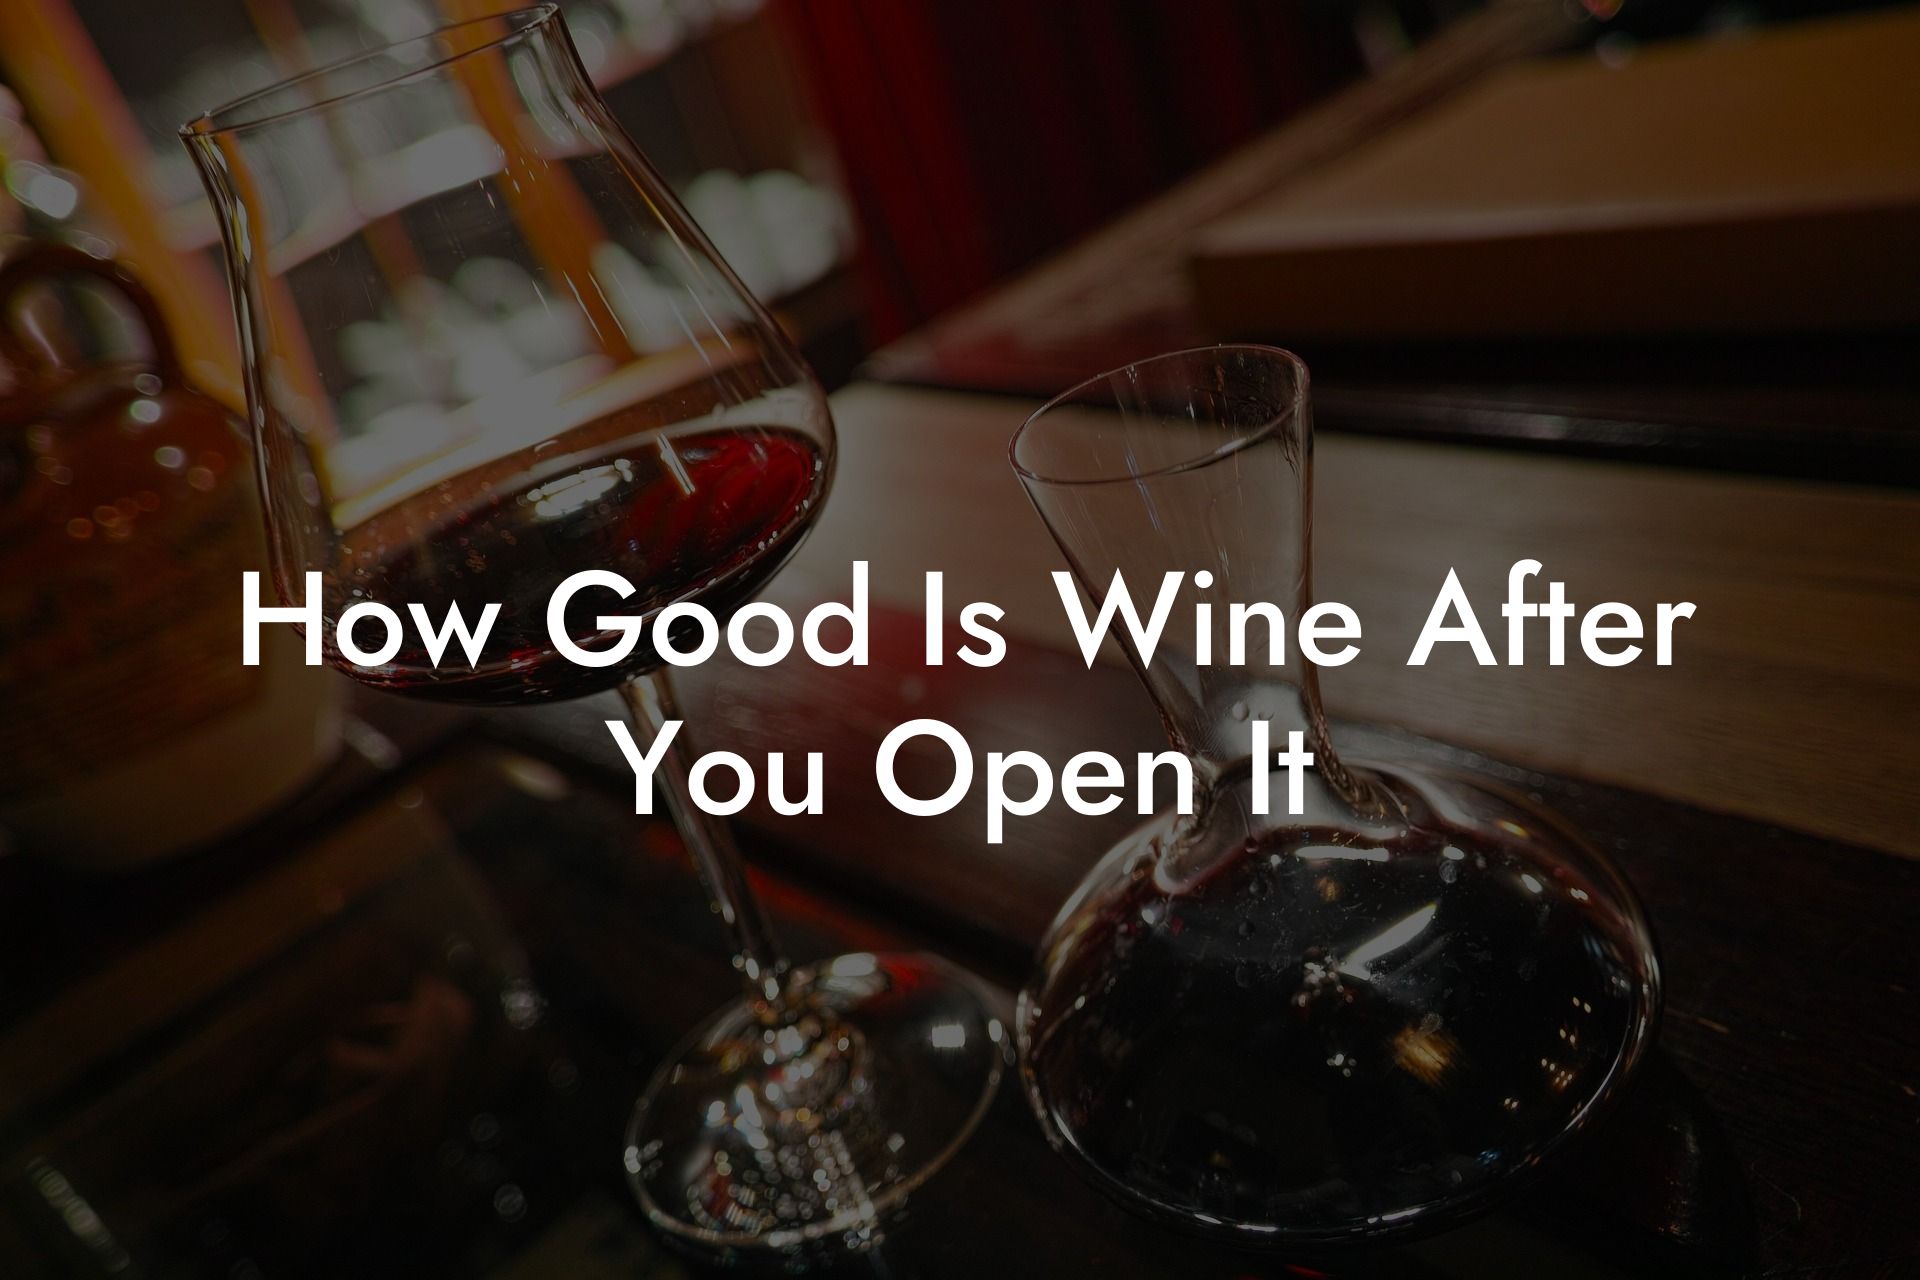 How Good Is Wine After You Open It